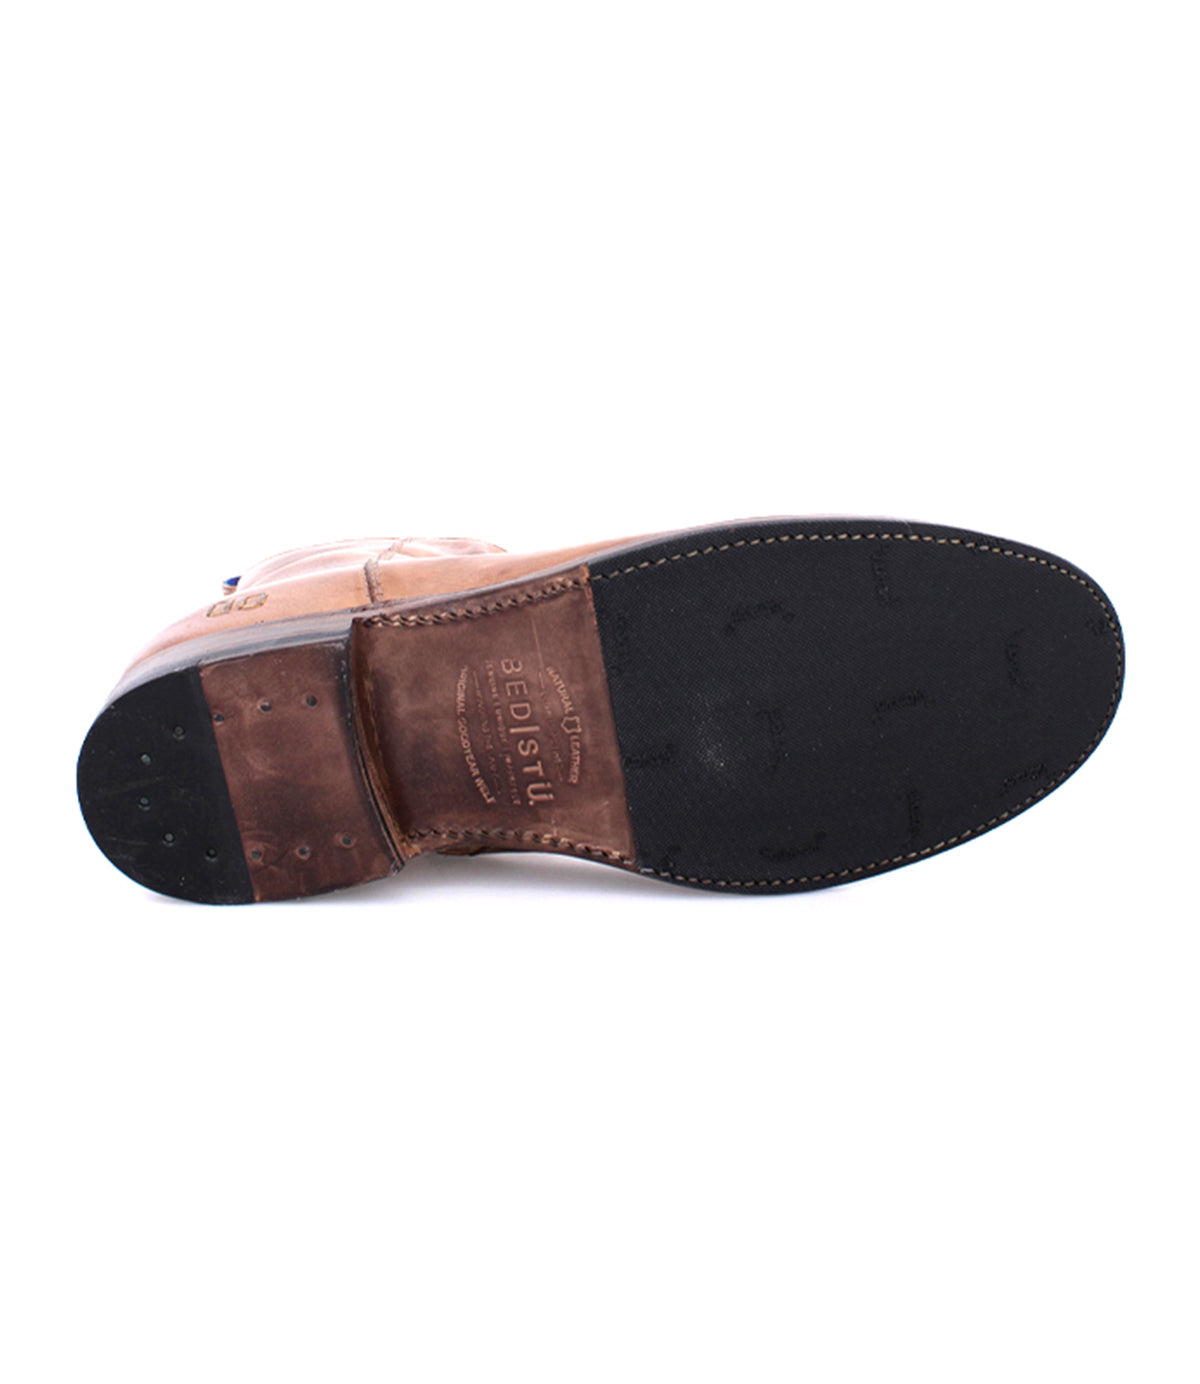 The back view of a Bed Stu Kaldi men's shoe with a handmade brown sole.